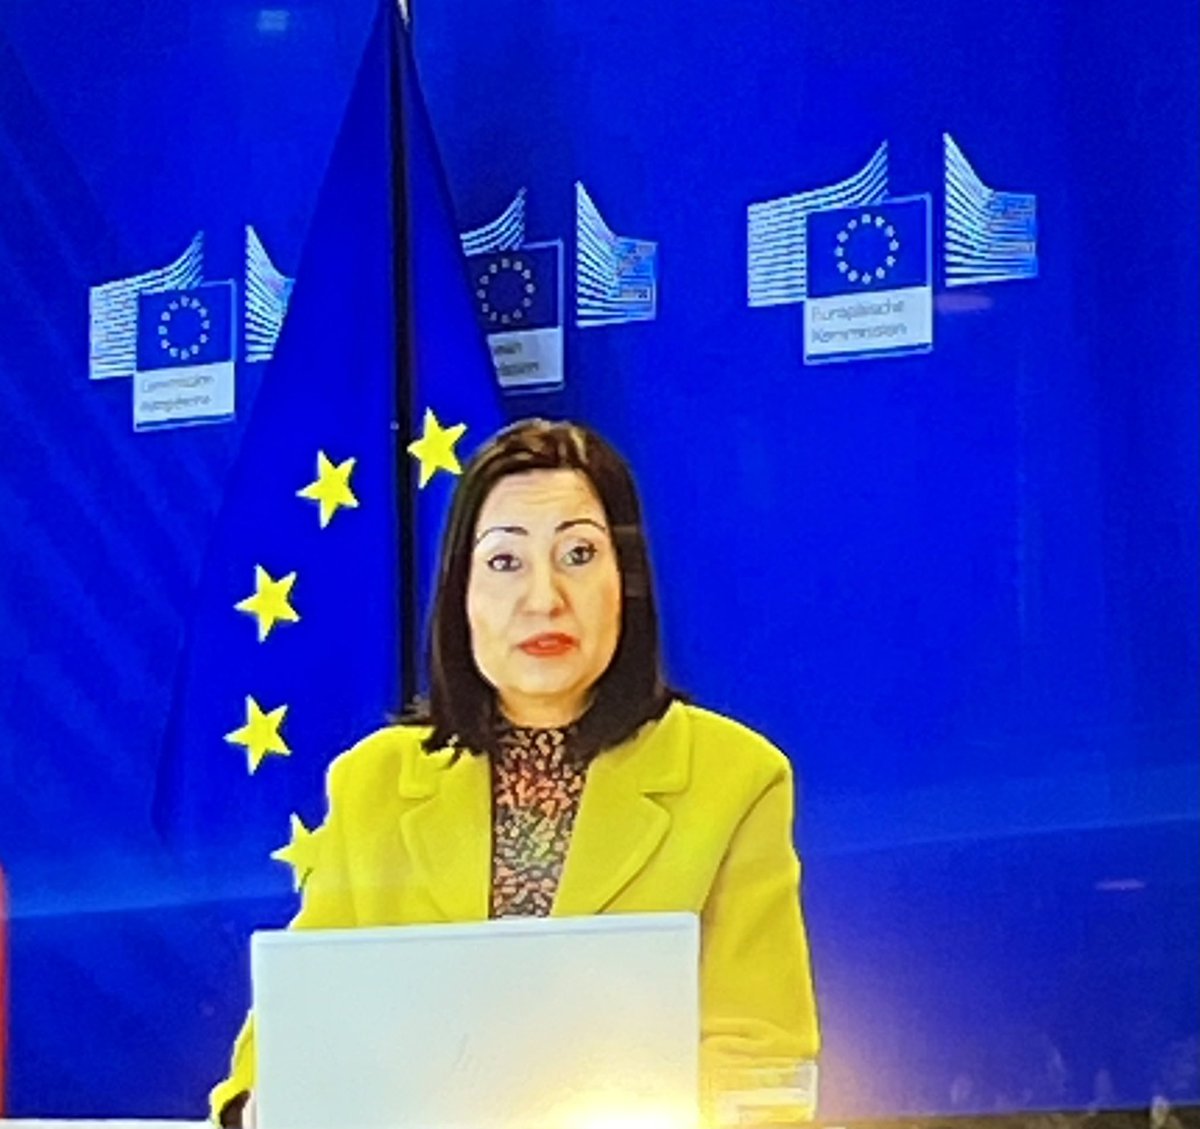 Good to hear from @Ili_Ivanova focus on #funding #research and #strategic #partnerships @HorizonEU Brilliant to see our common and shared purpose in the pursuit of #research #excellence and #impact Glad to also hear about all the #partners involved in #EU #research #innovation